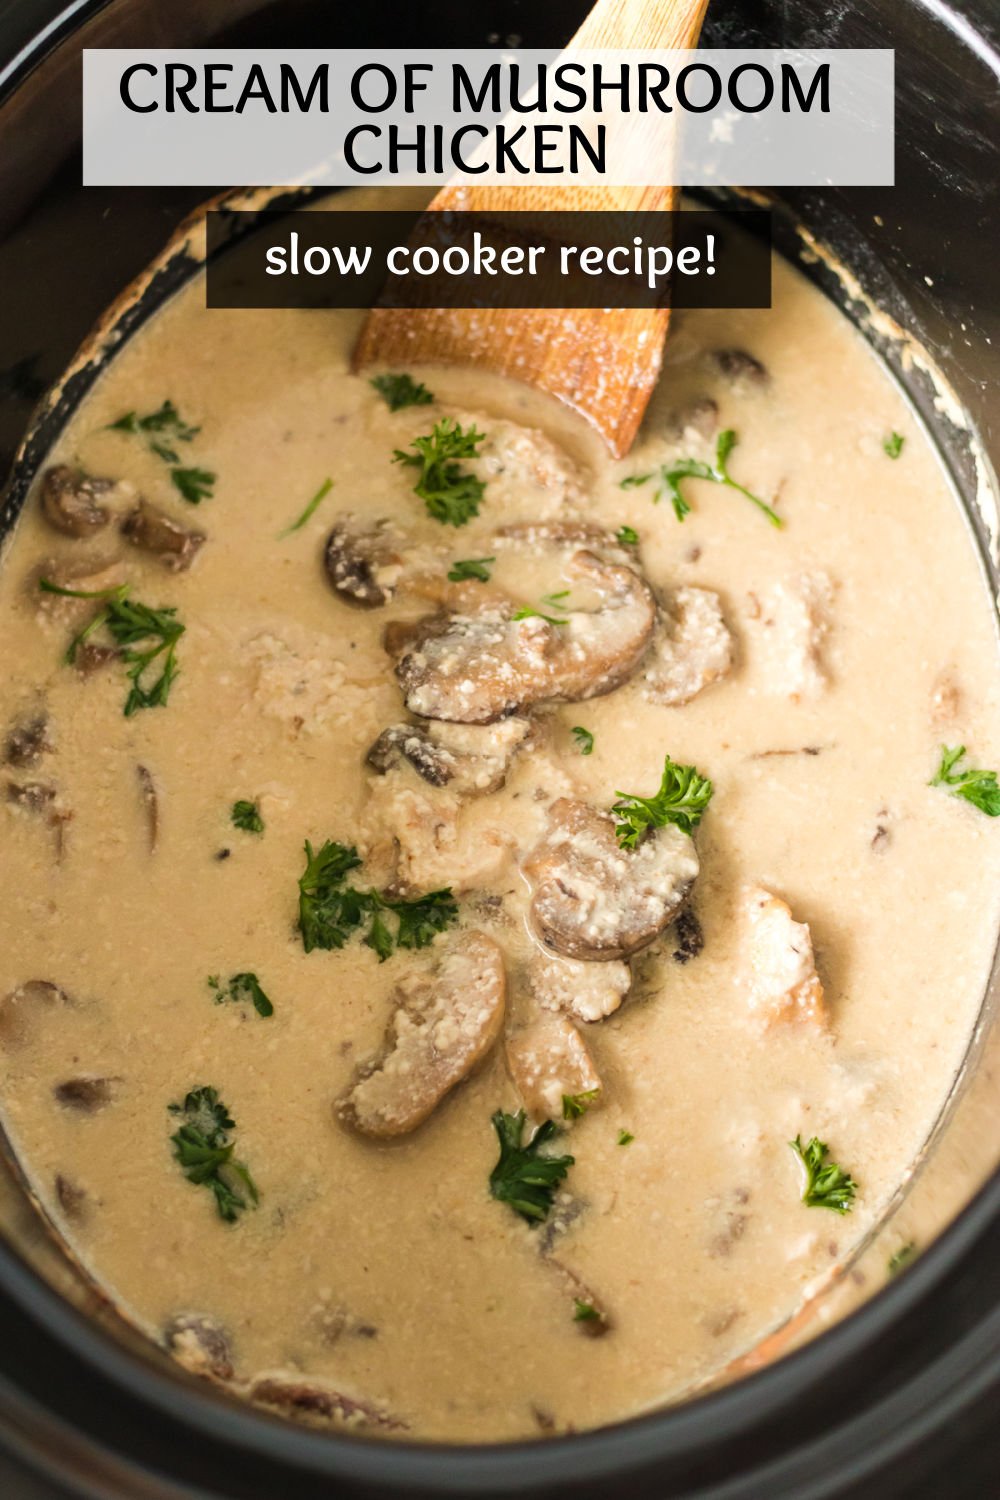 This easy Crockpot Creamy Mushroom Chicken is a family favorite, and for good reason! The creamy mushroom sauce makes a delicious sauce for avocado noodles, paella, or mashed potatoes. | takeoutfood.best